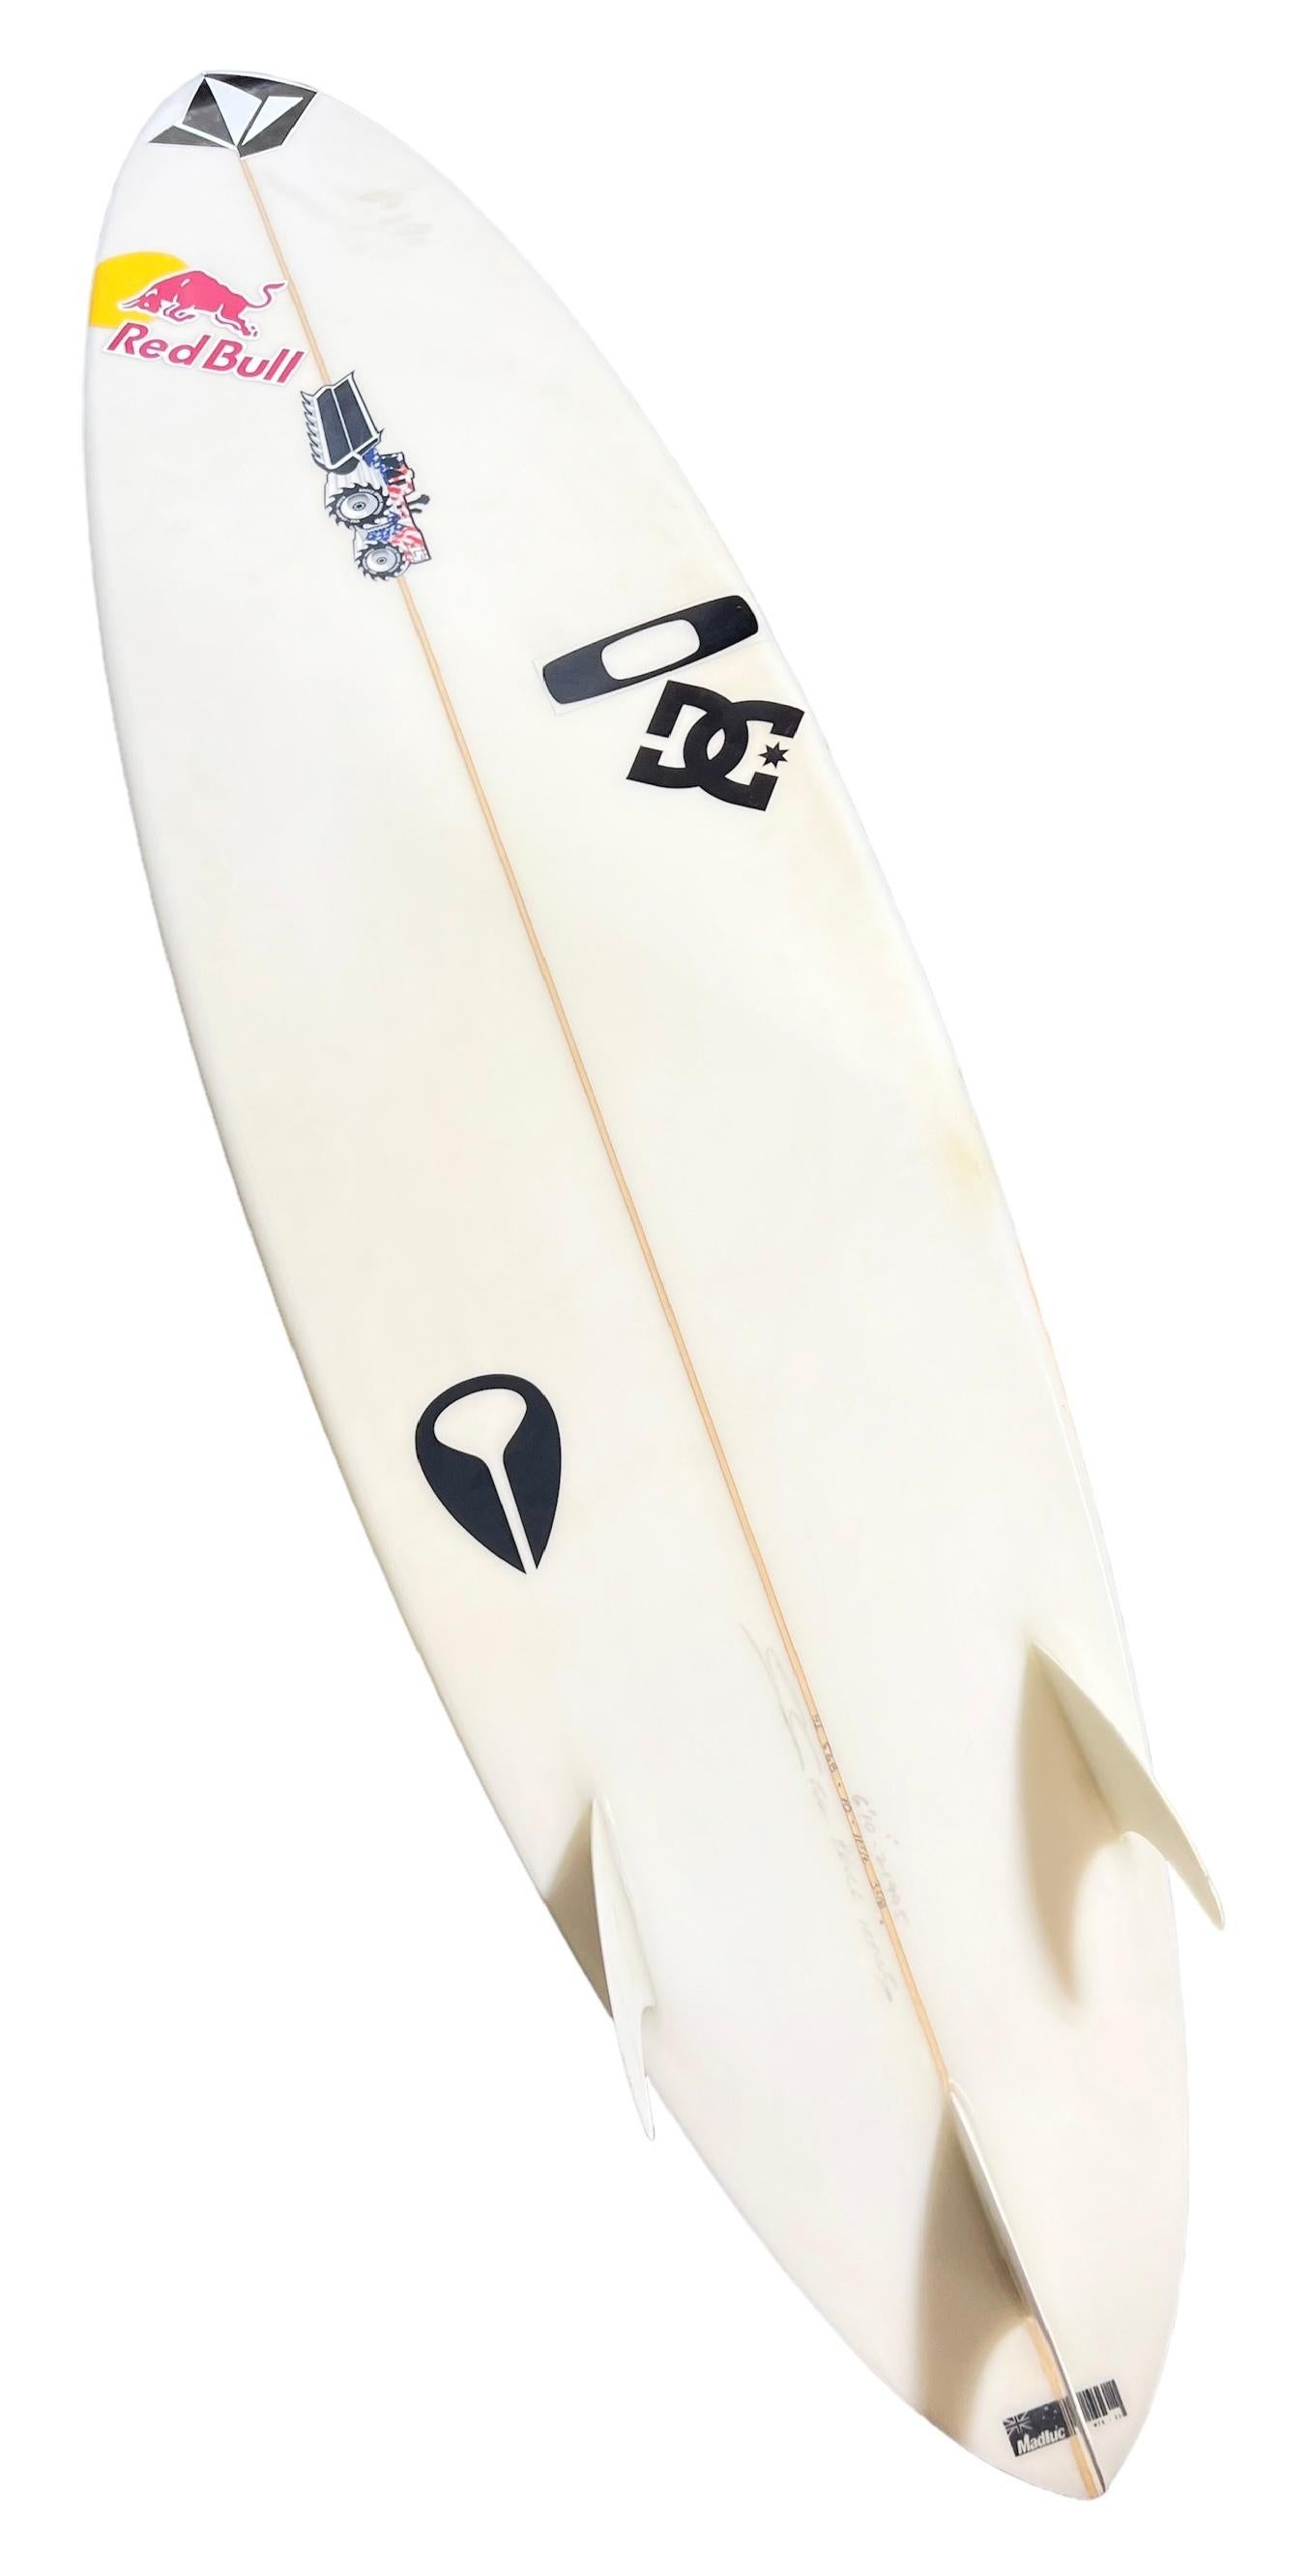 Champion surfer Bruce Iron’s personal surfboard made by JS Industries. Features Bruce’s signature star symbol artwork design with airbrushed color fade. Famous for his unbelievably high aerial maneuvers and top level barrel riding abilities. Bruce